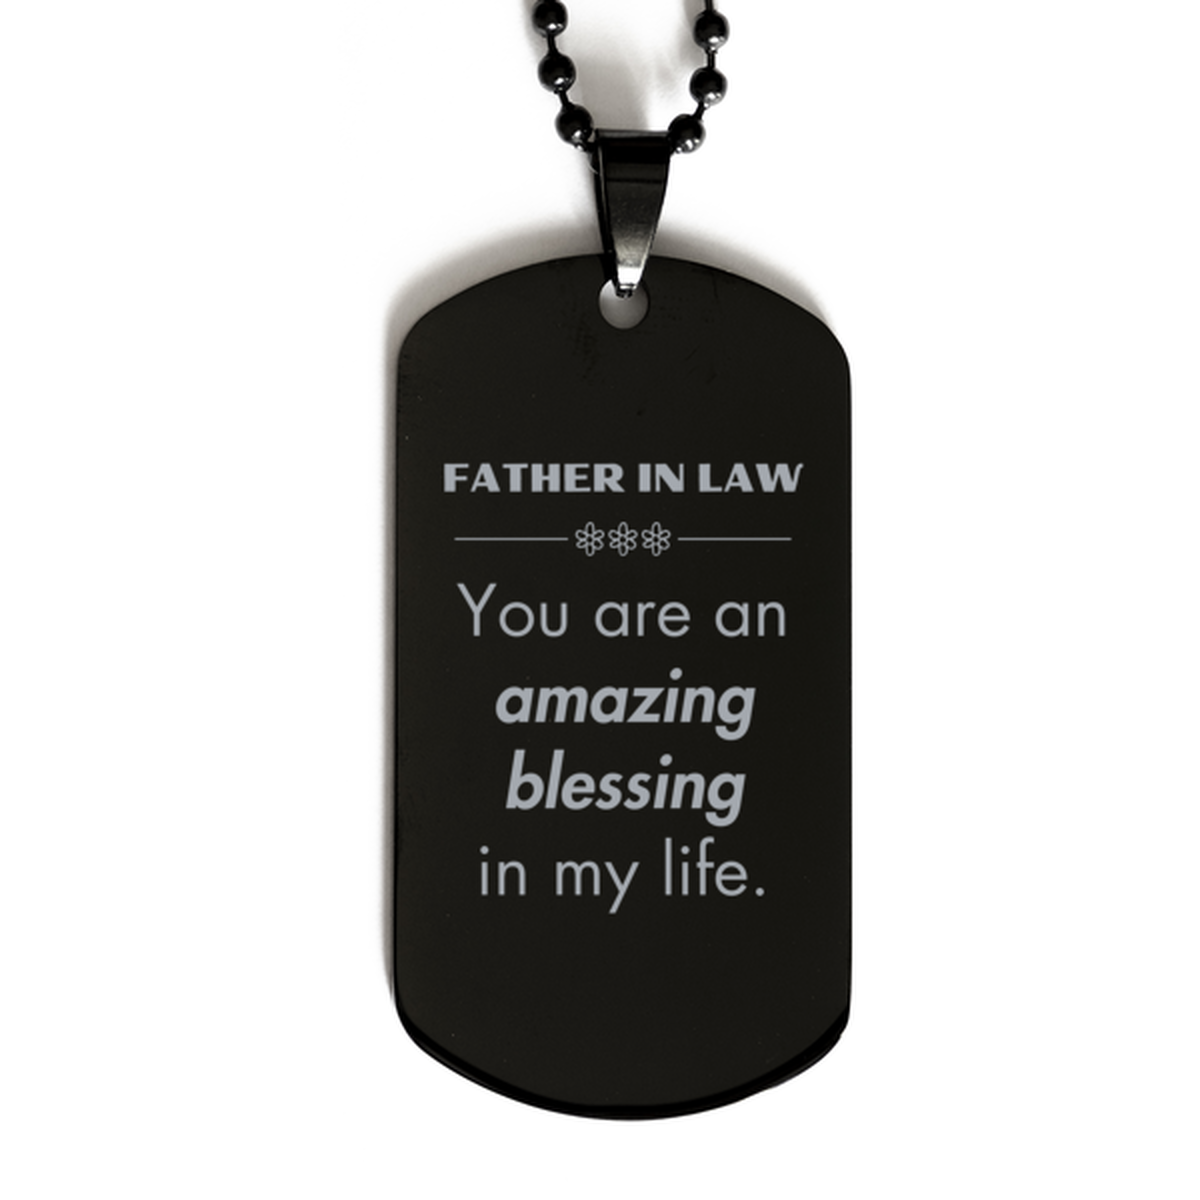 Father In Law Black Dog Tag, You are an amazing blessing in my life, Thank You Gifts For Father In Law, Inspirational Birthday Christmas Unique Gifts For Father In Law